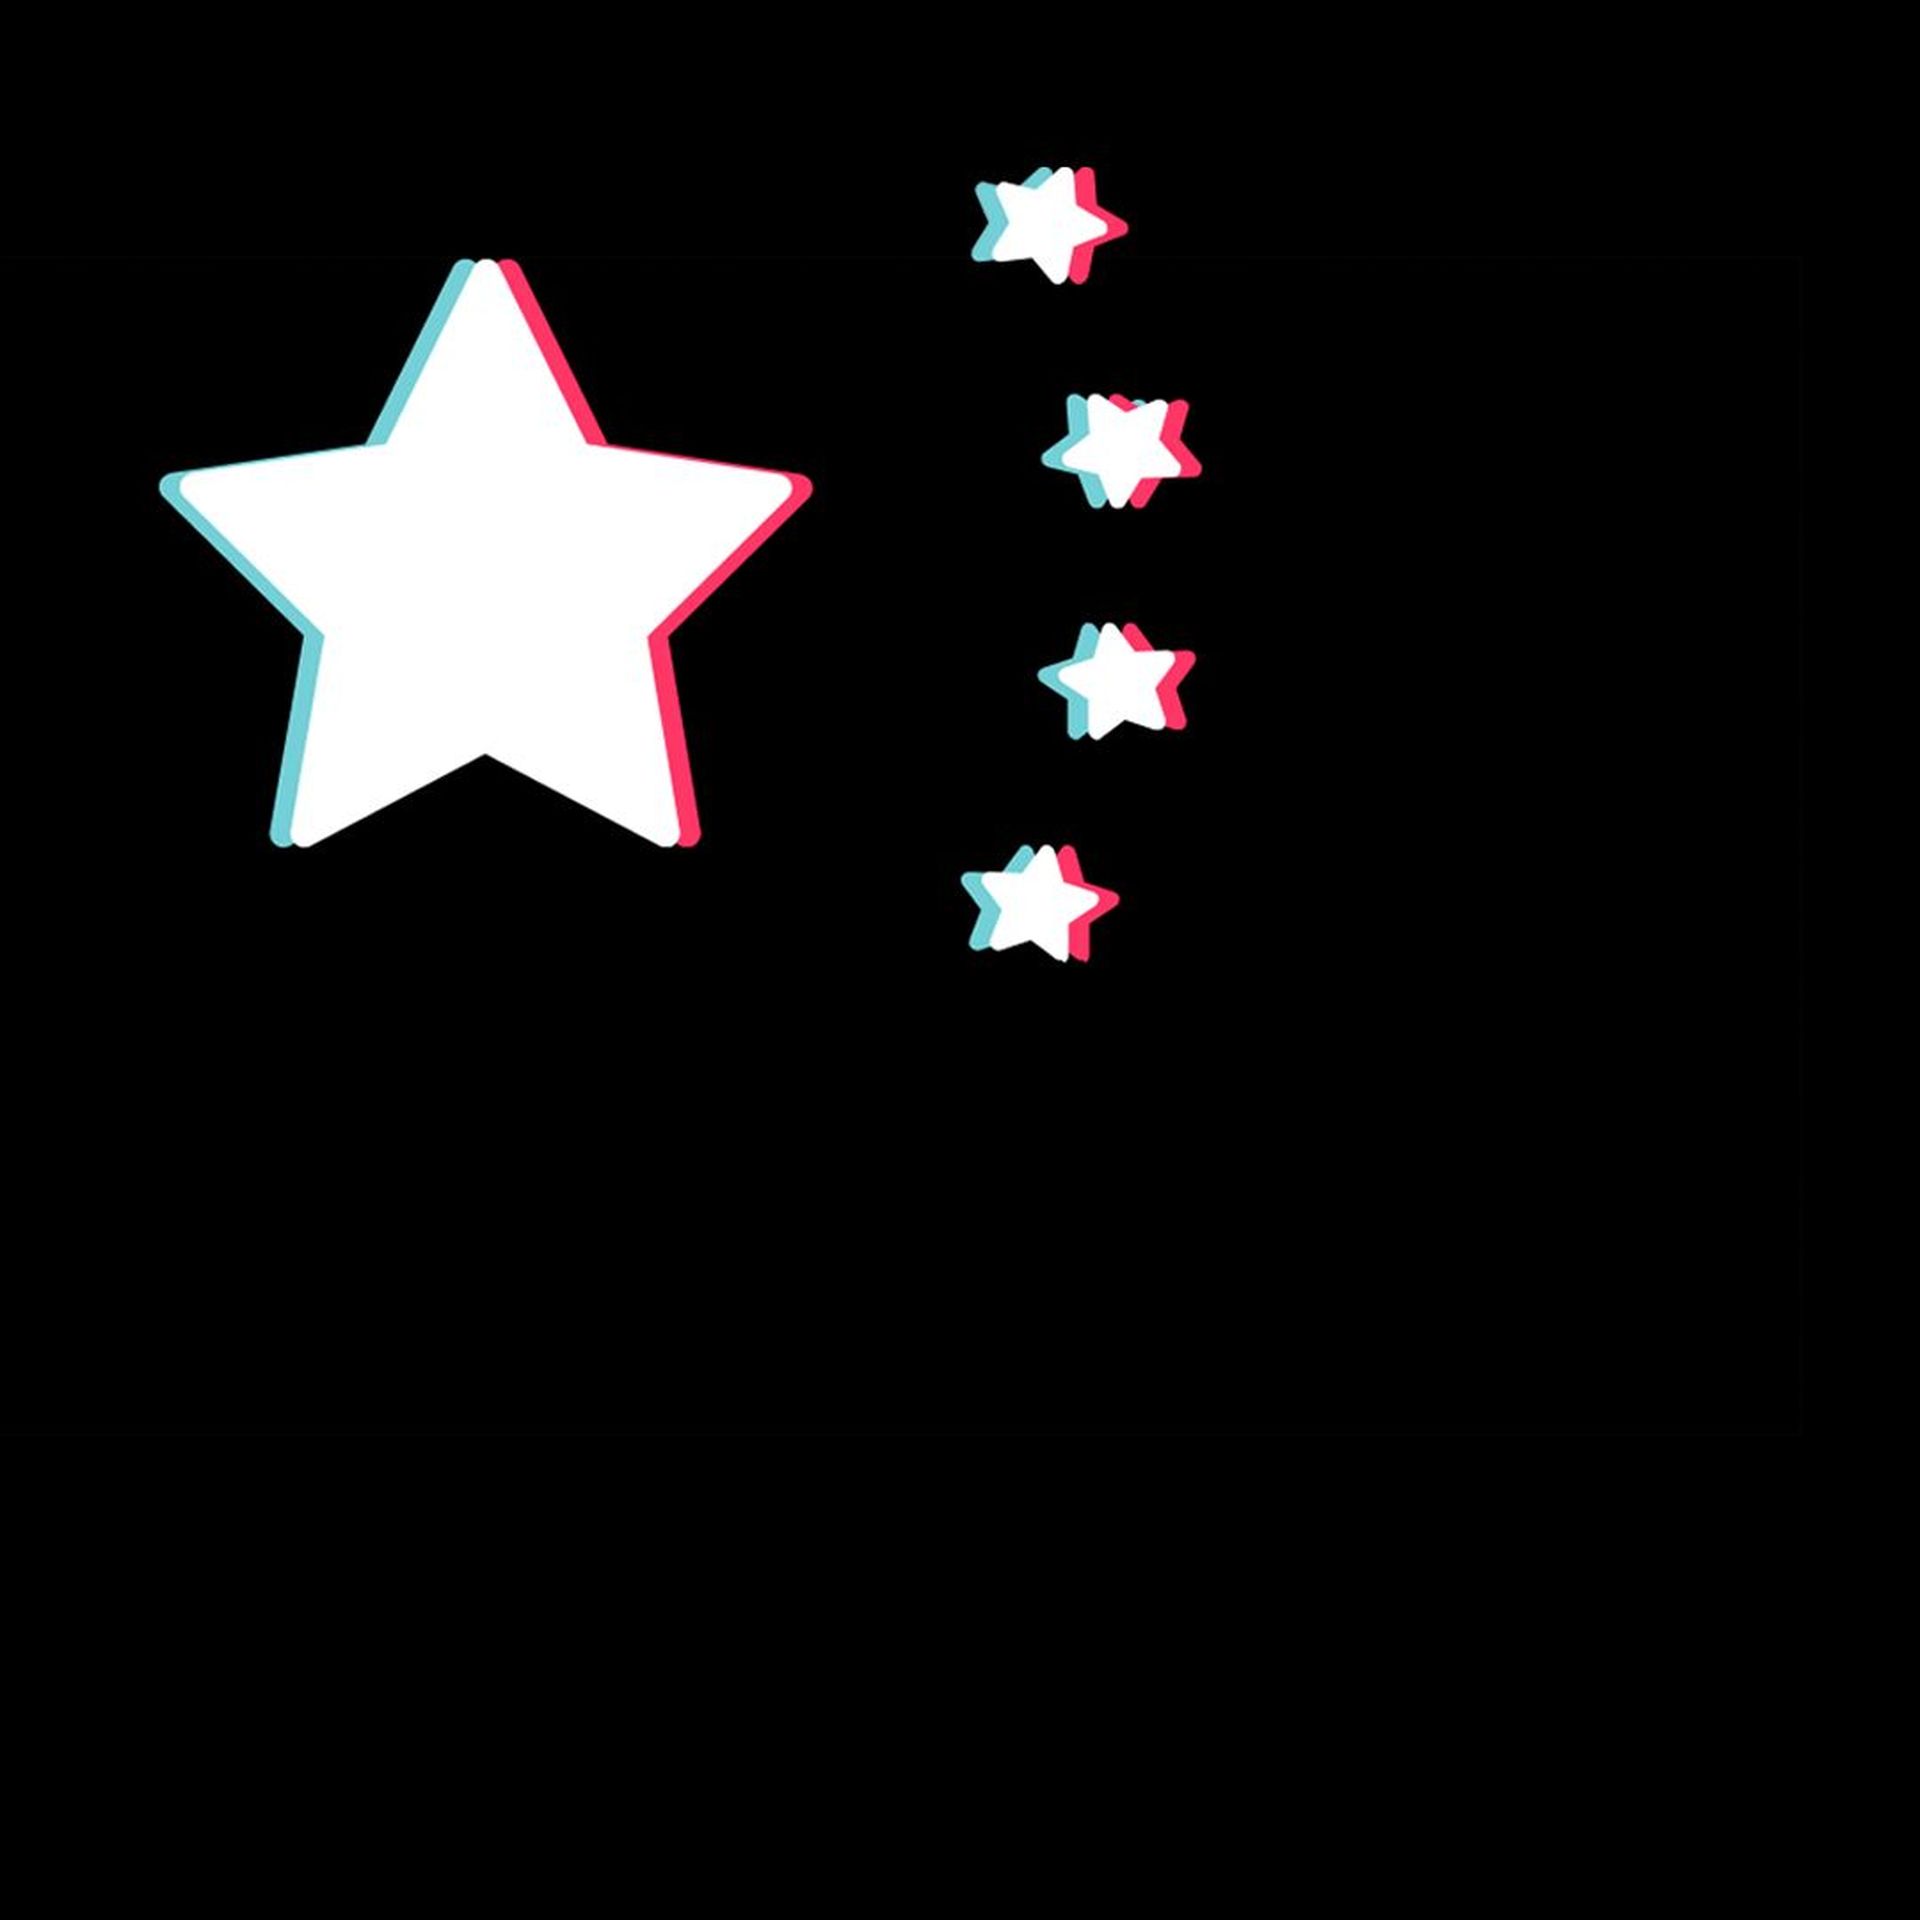 Illustration of the Chinese flag with the stars rendered in TikTok's logo style.